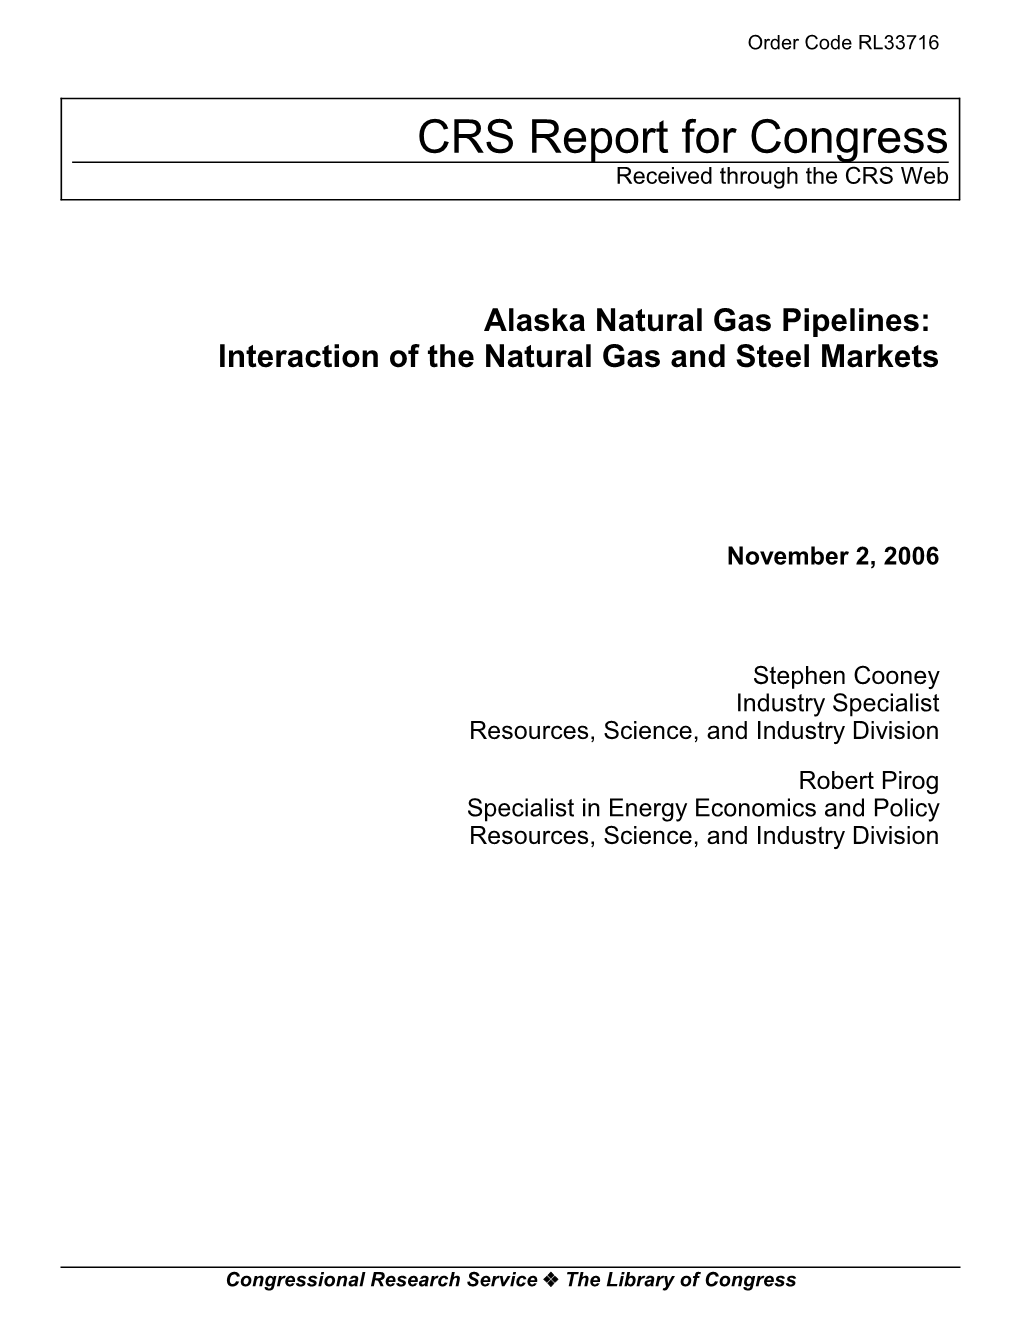 Alaska Natural Gas Pipelines: Interaction of the Natural Gas and Steel Markets